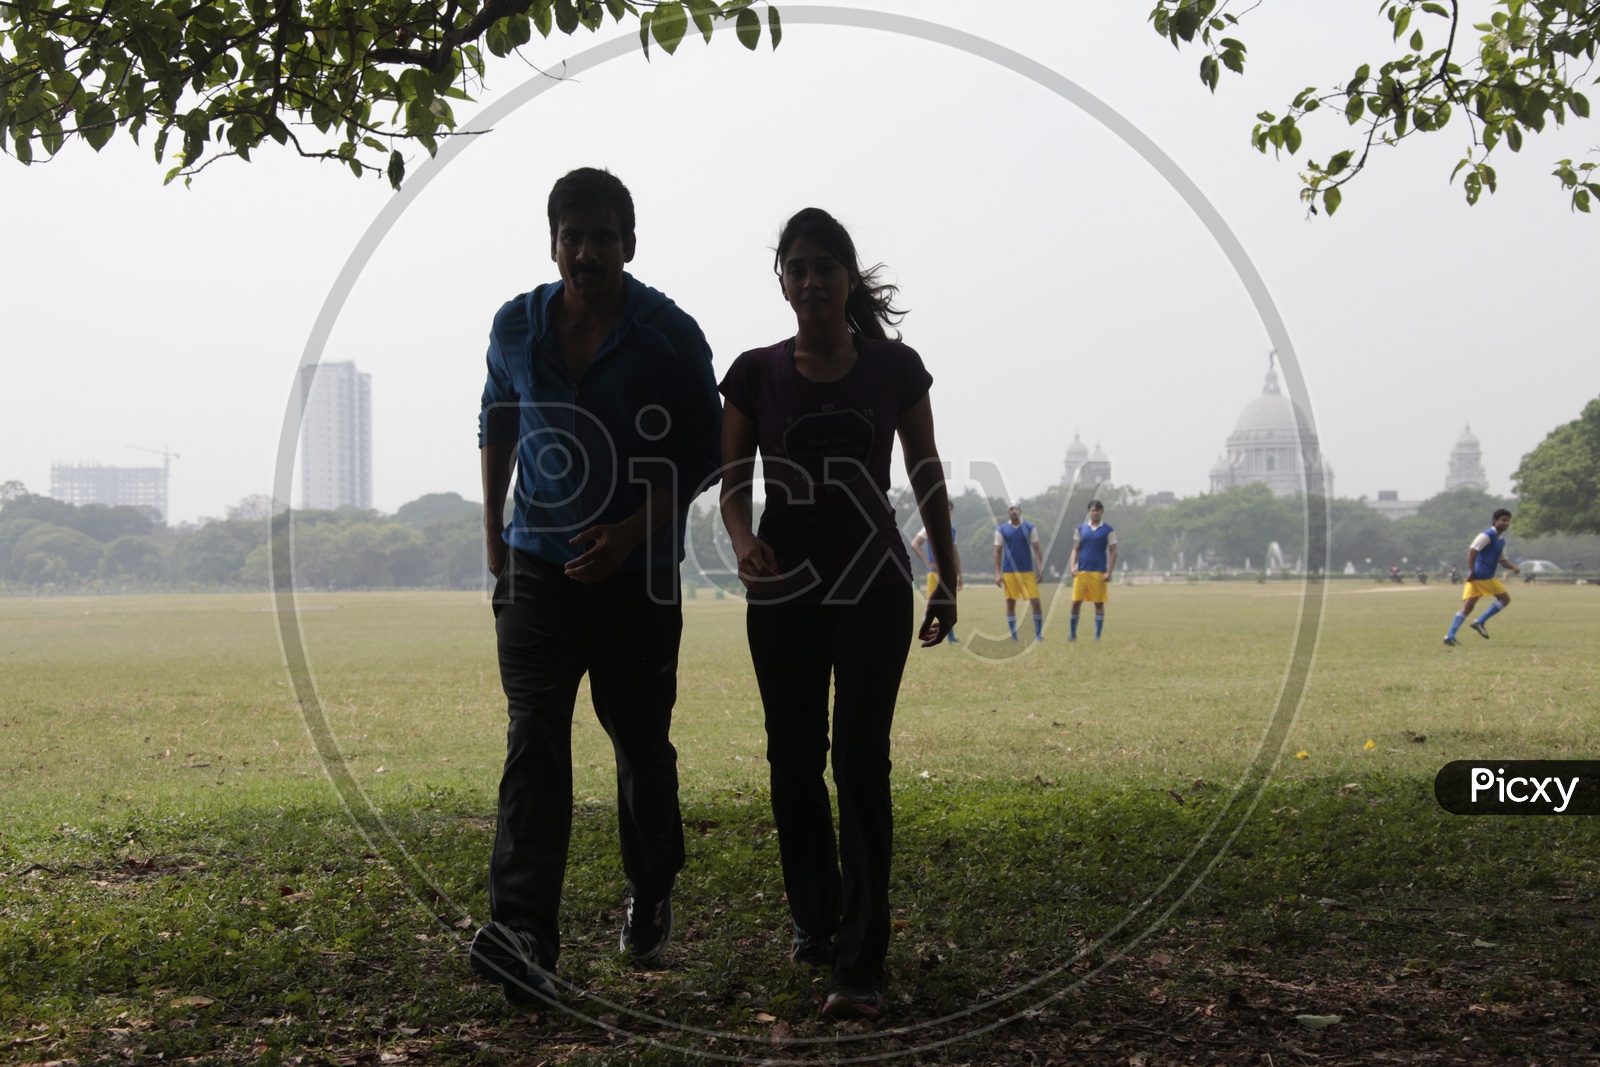 Silhouette Of a Couple Walking In a Football Ground